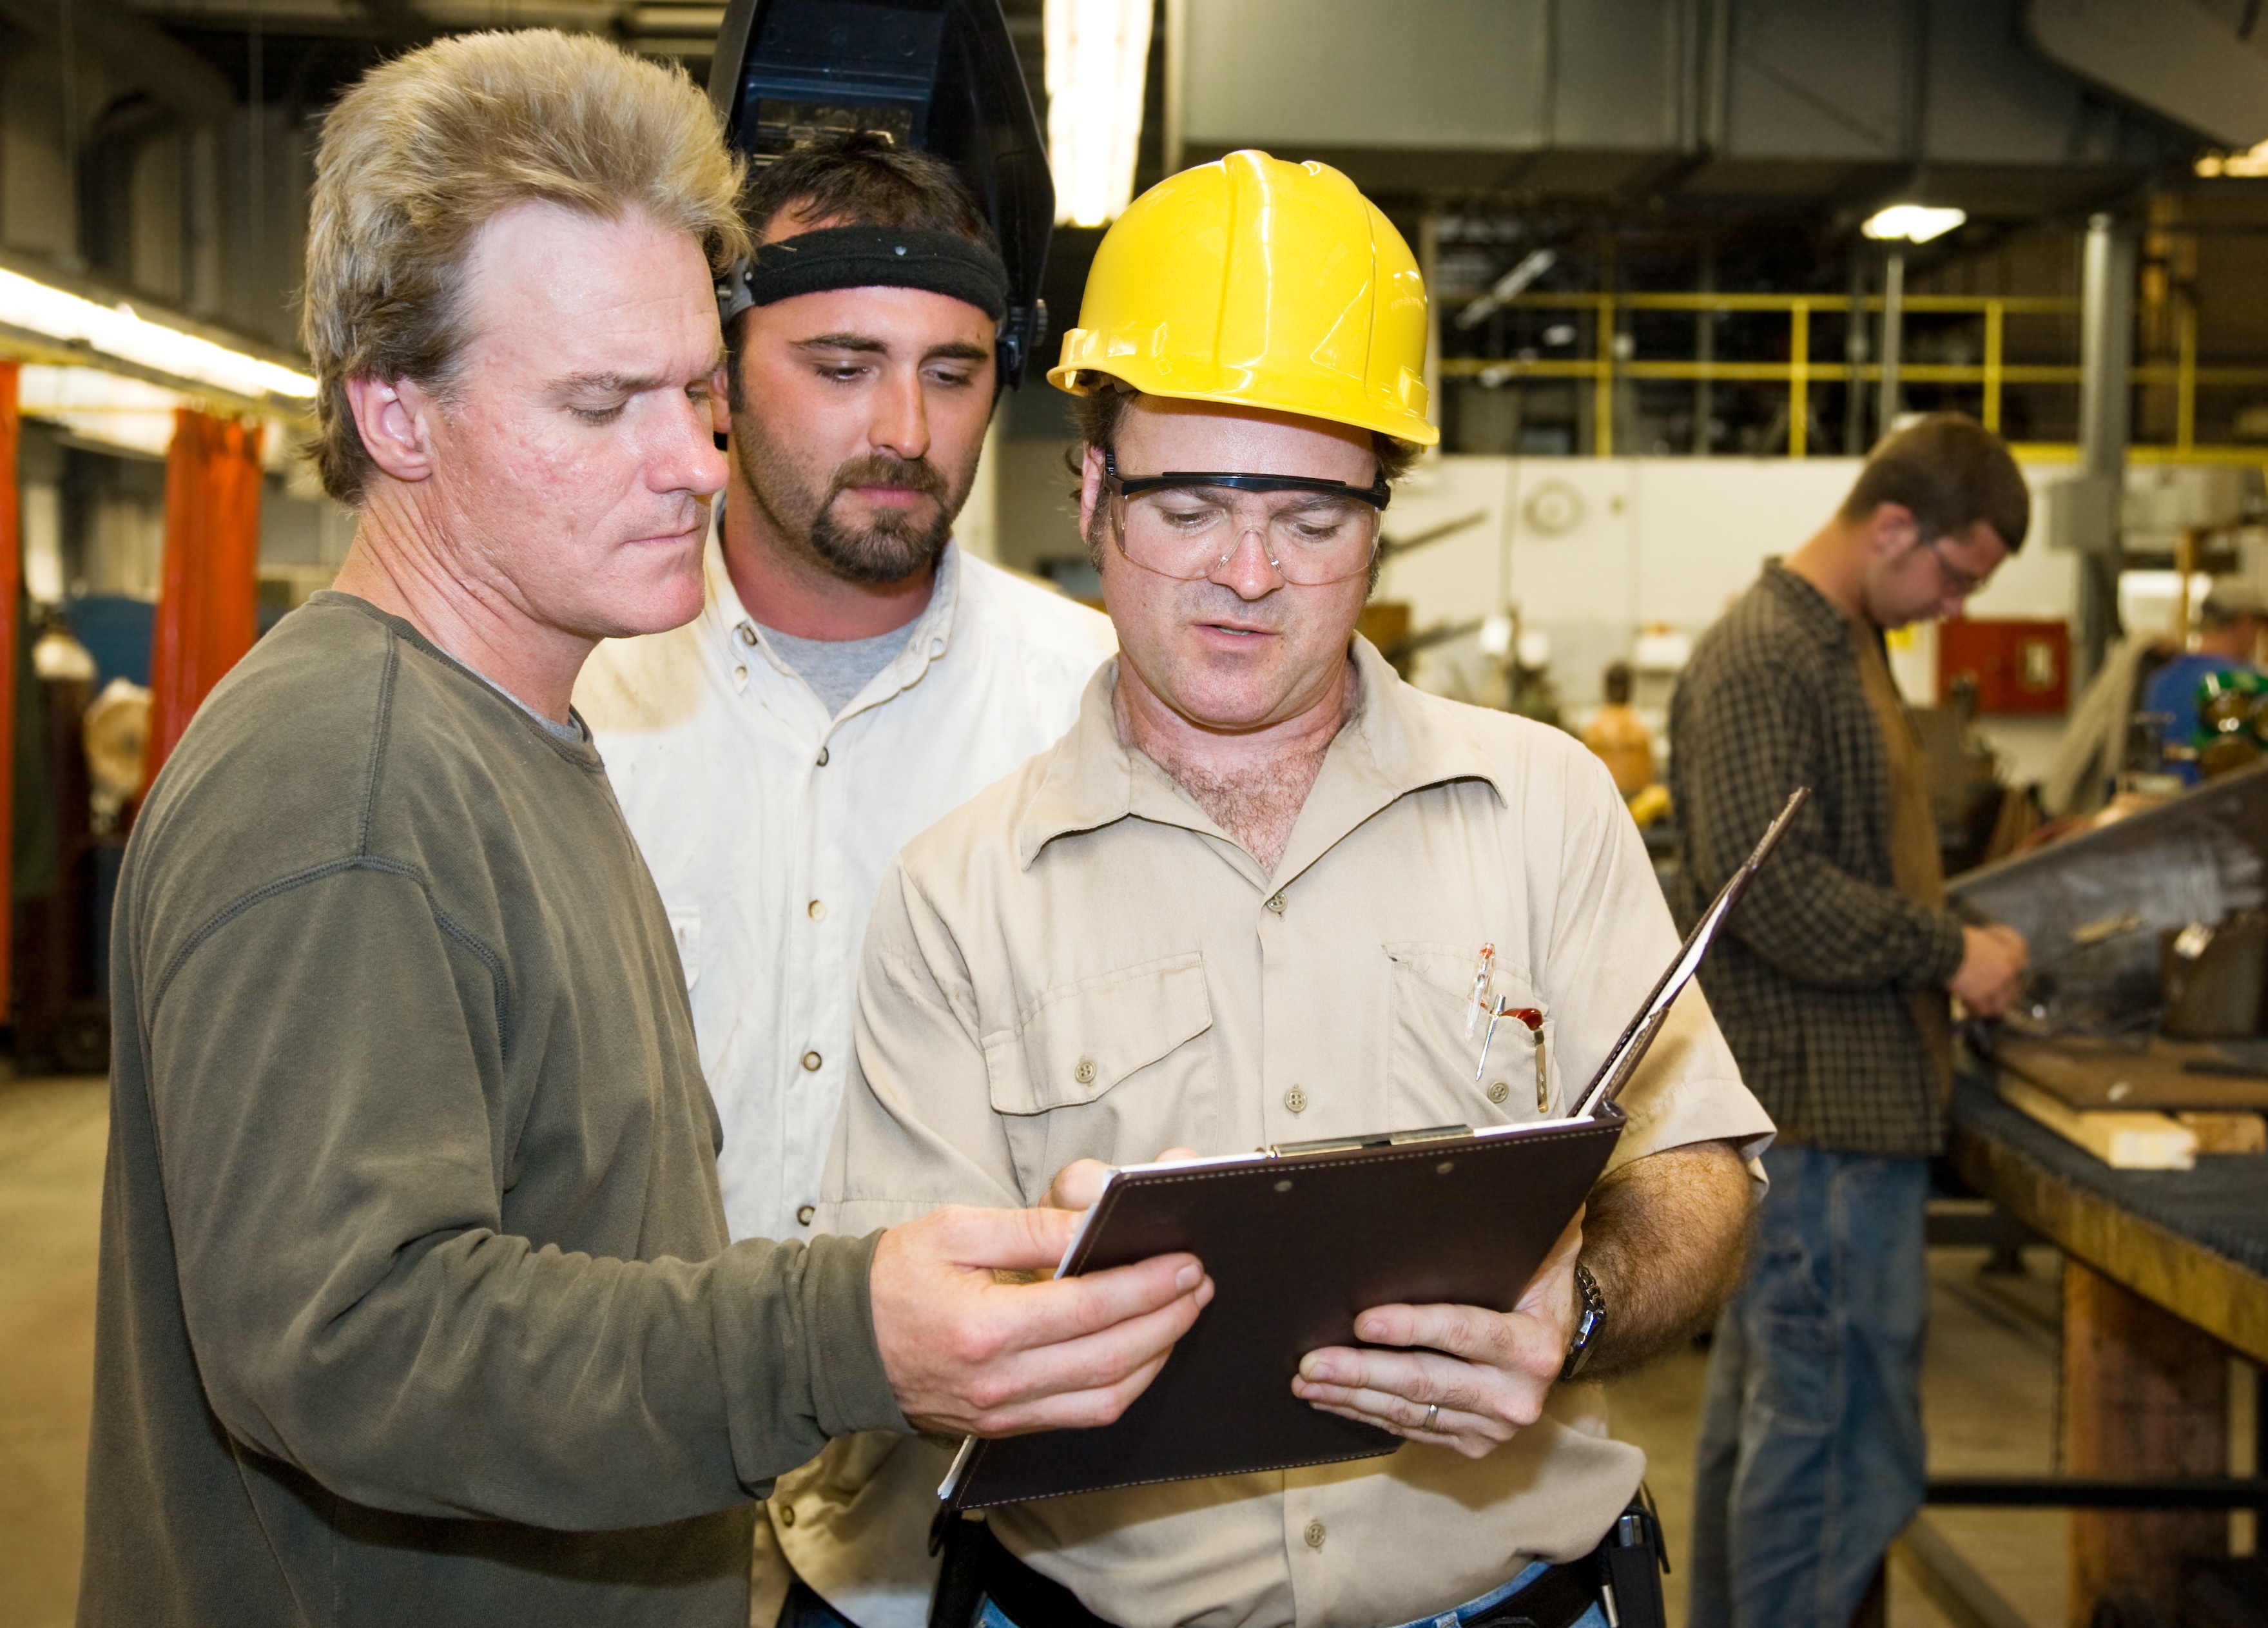 An OSHA inspector and two factory workers looking at a clipboard